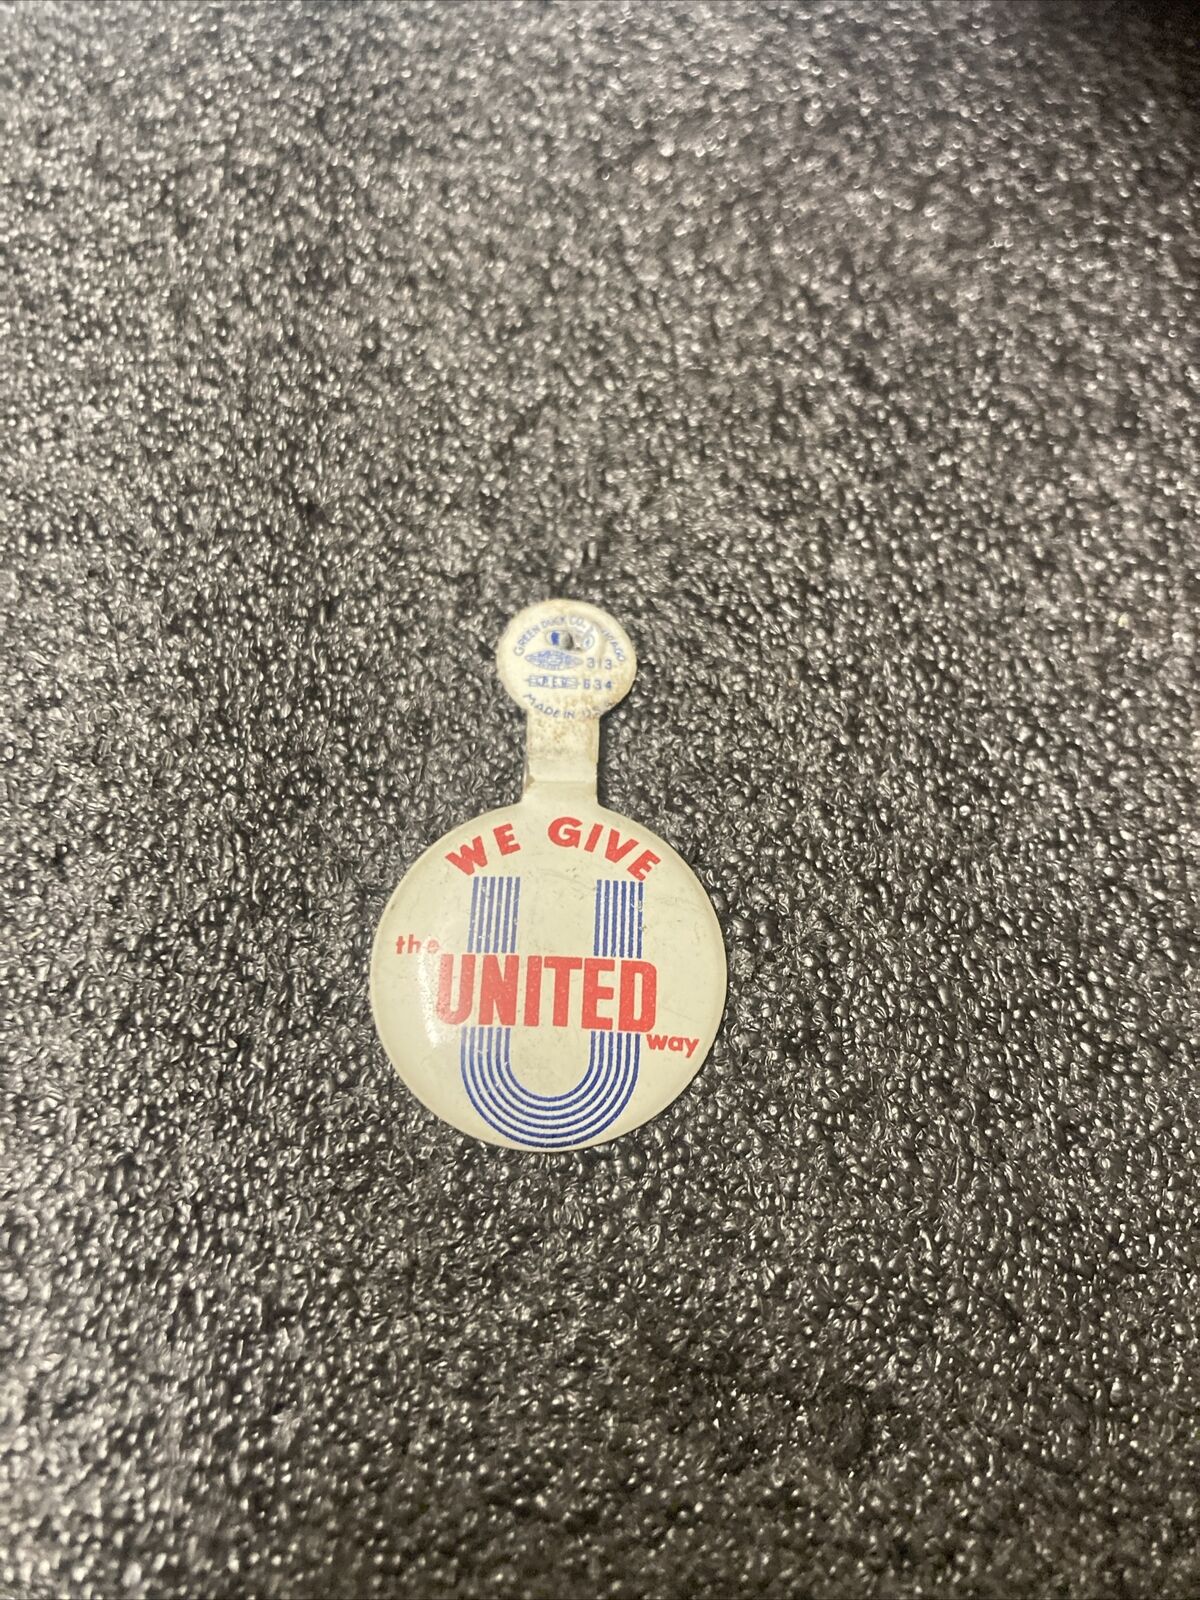 USED Vintage 1940s-1950s We Give The United Way Button Folding Tab Button. Nice